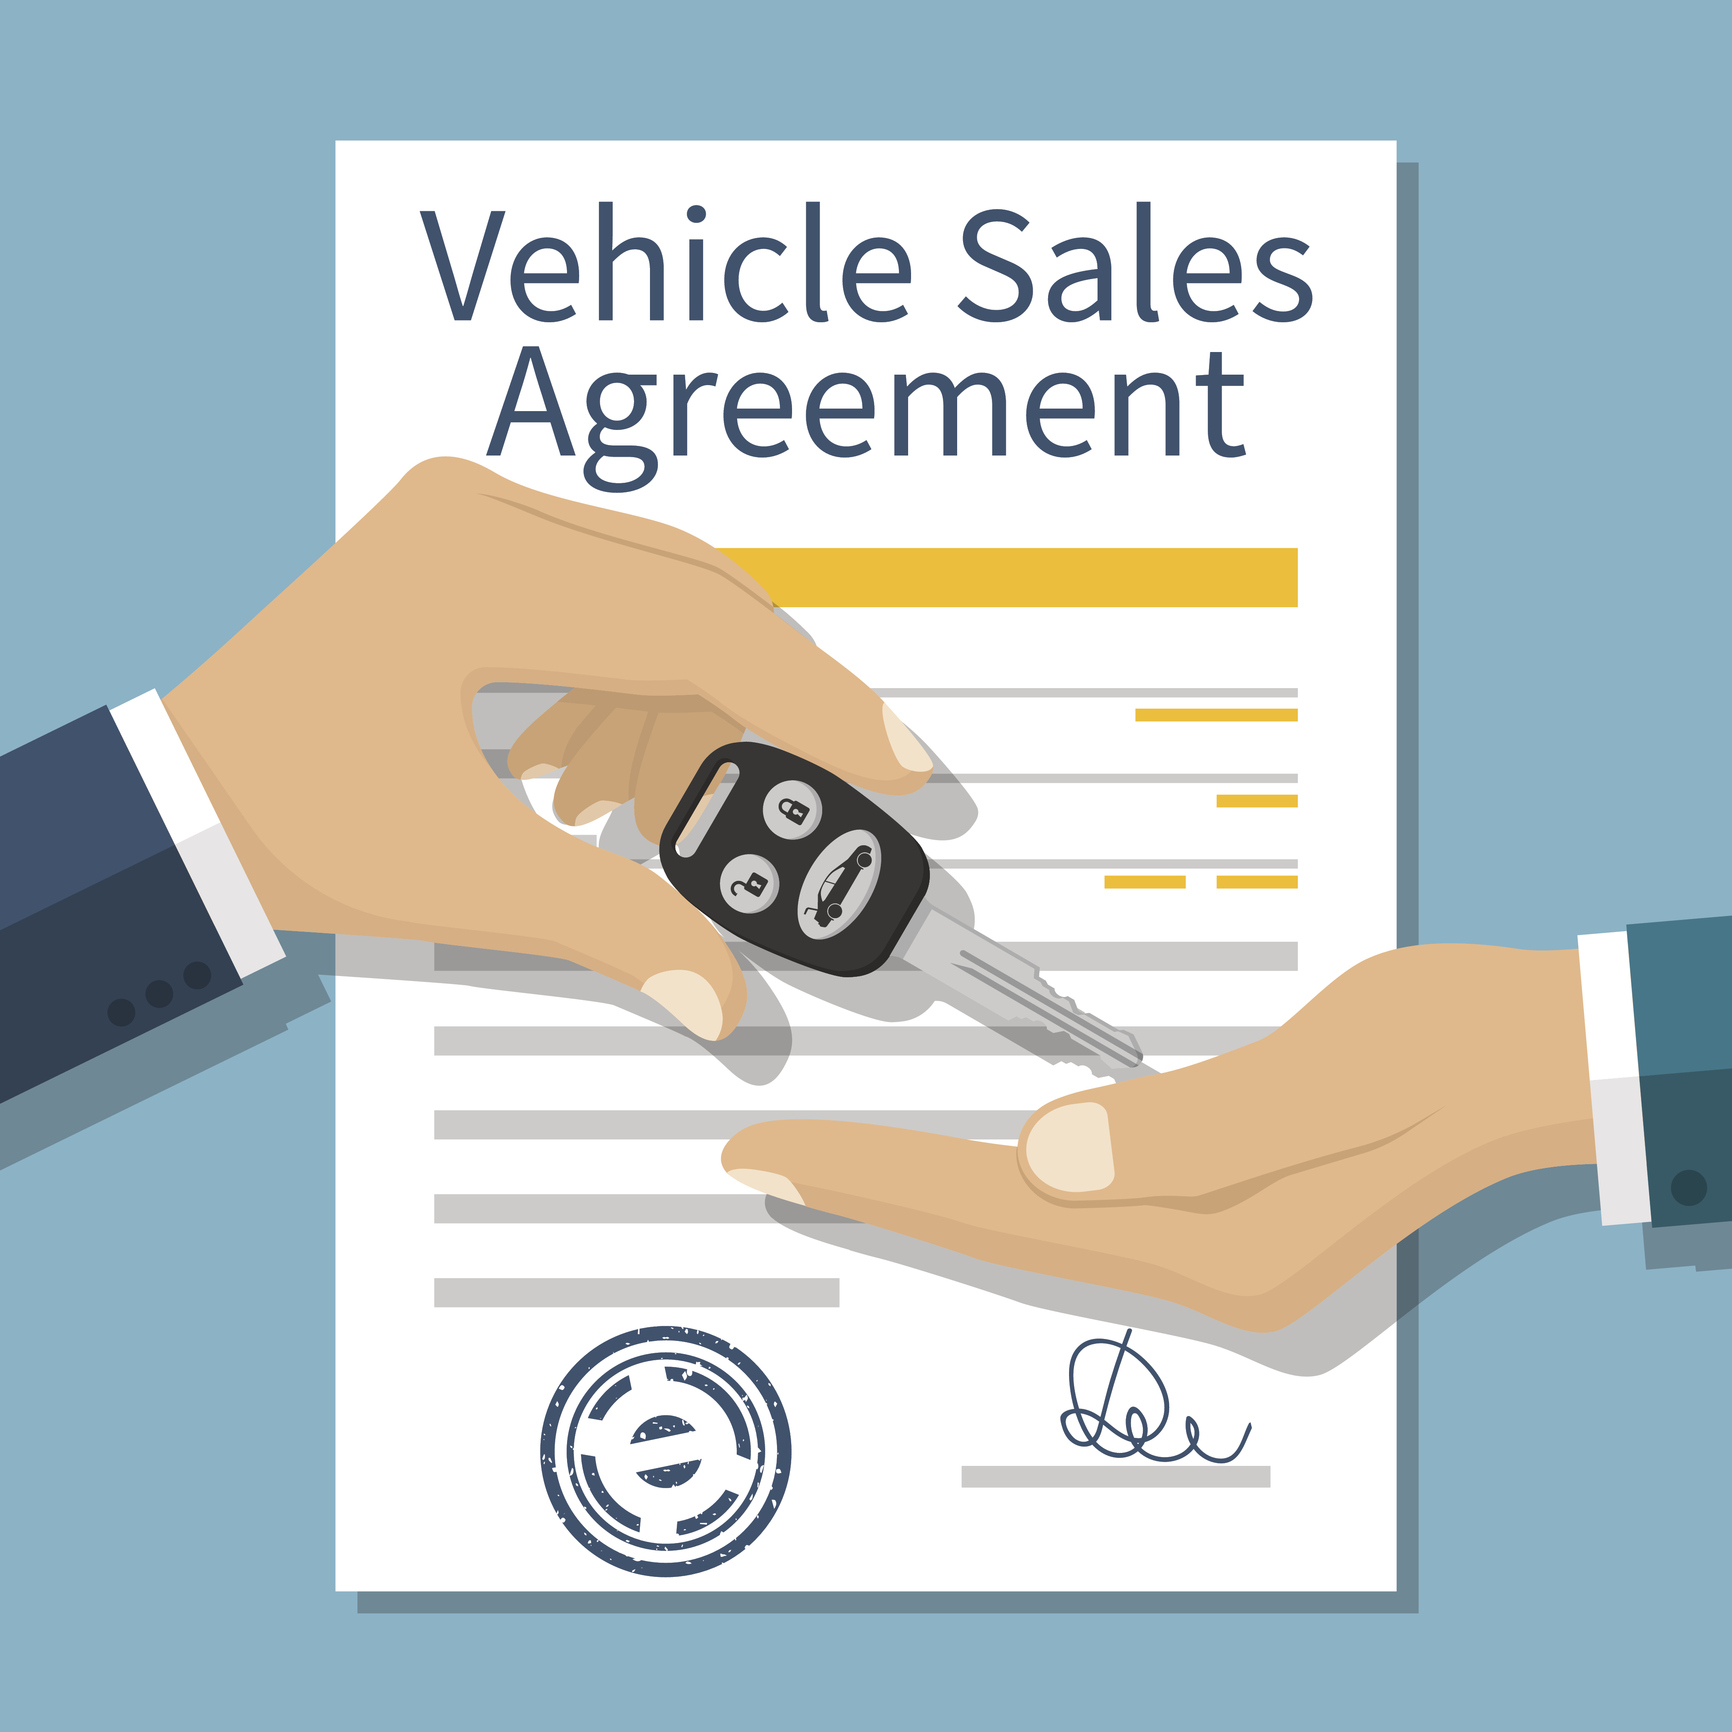 4 Questions You Should Ask the Dealer When Car Shopping